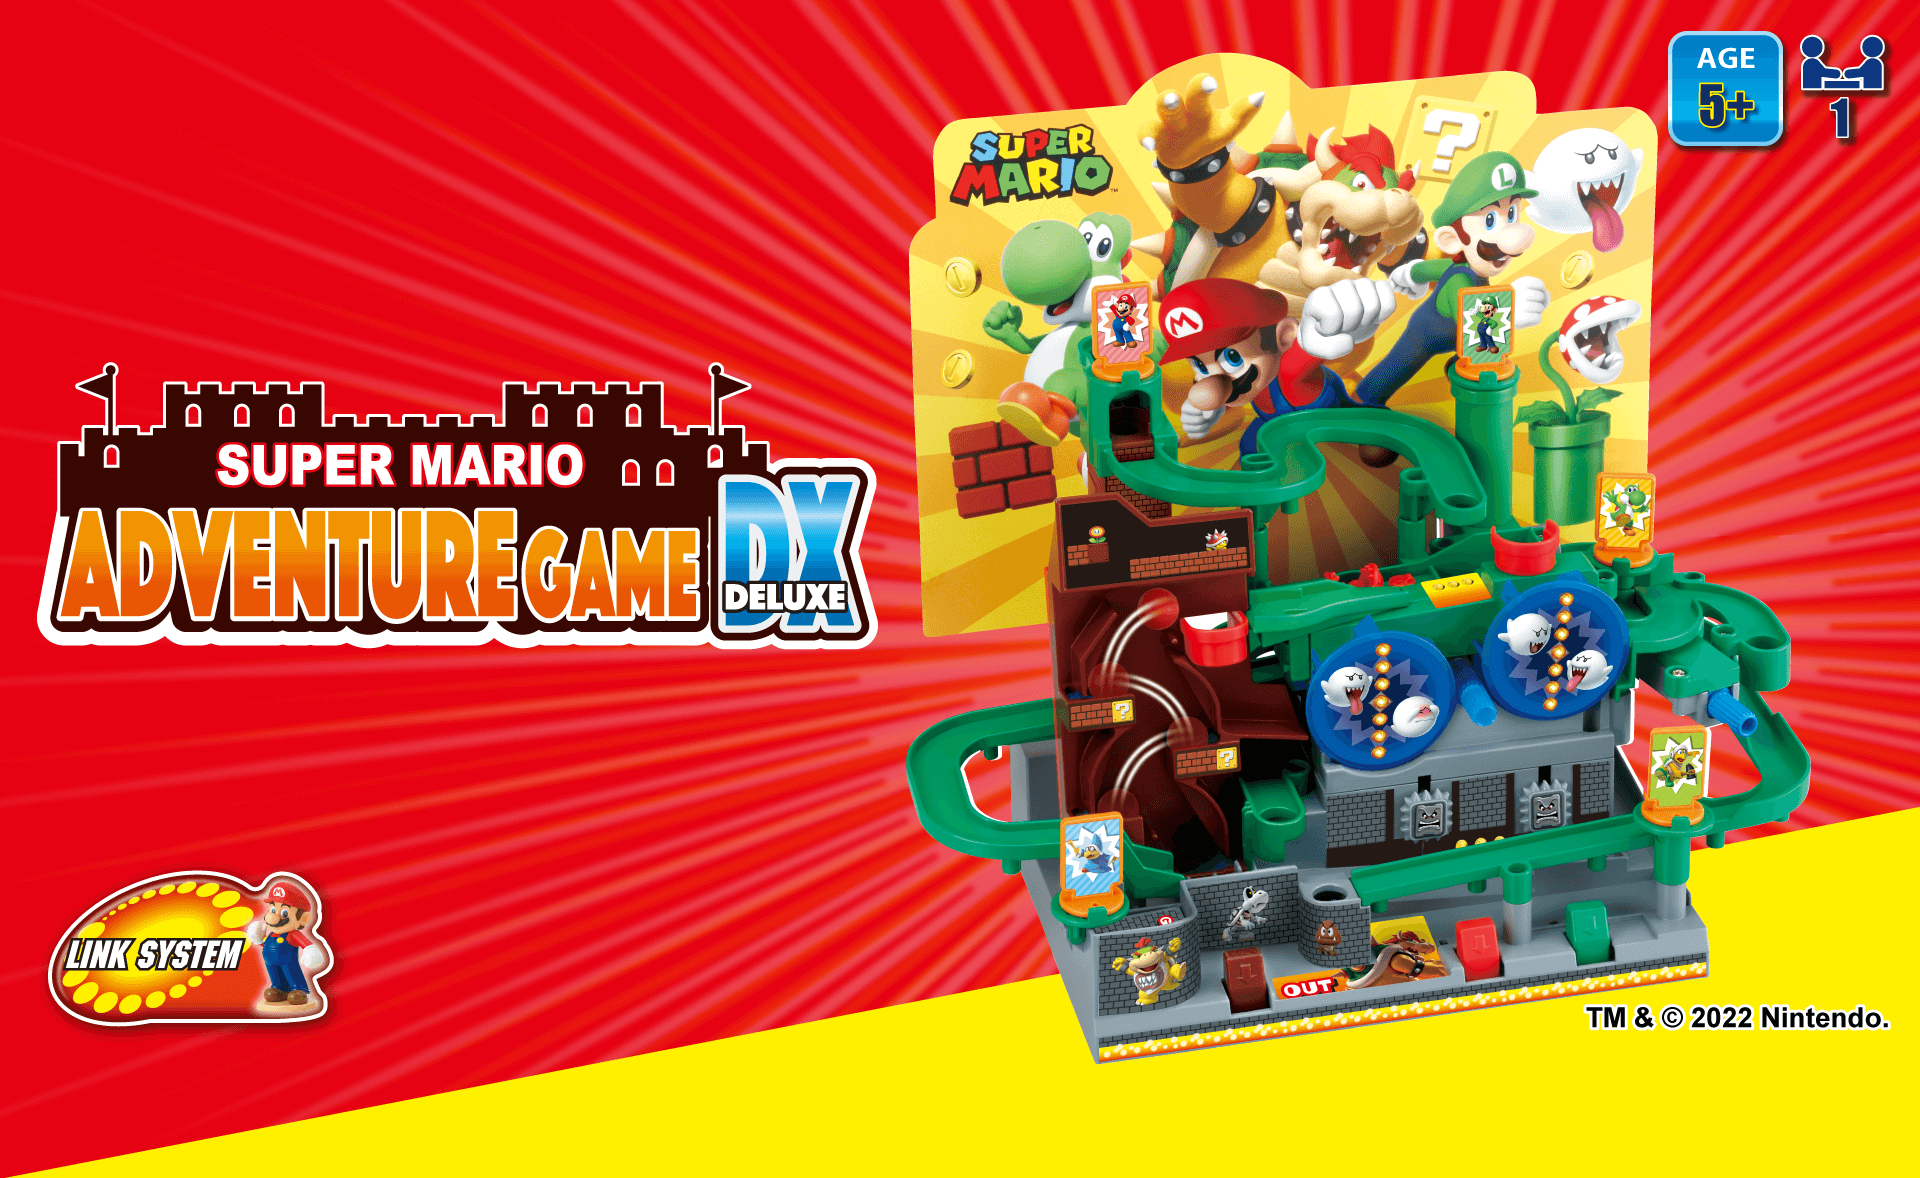 Epoch Games' Super Mario™ TM Super Mario™ Adventure Game Deluxe!Family board game for ages 5+